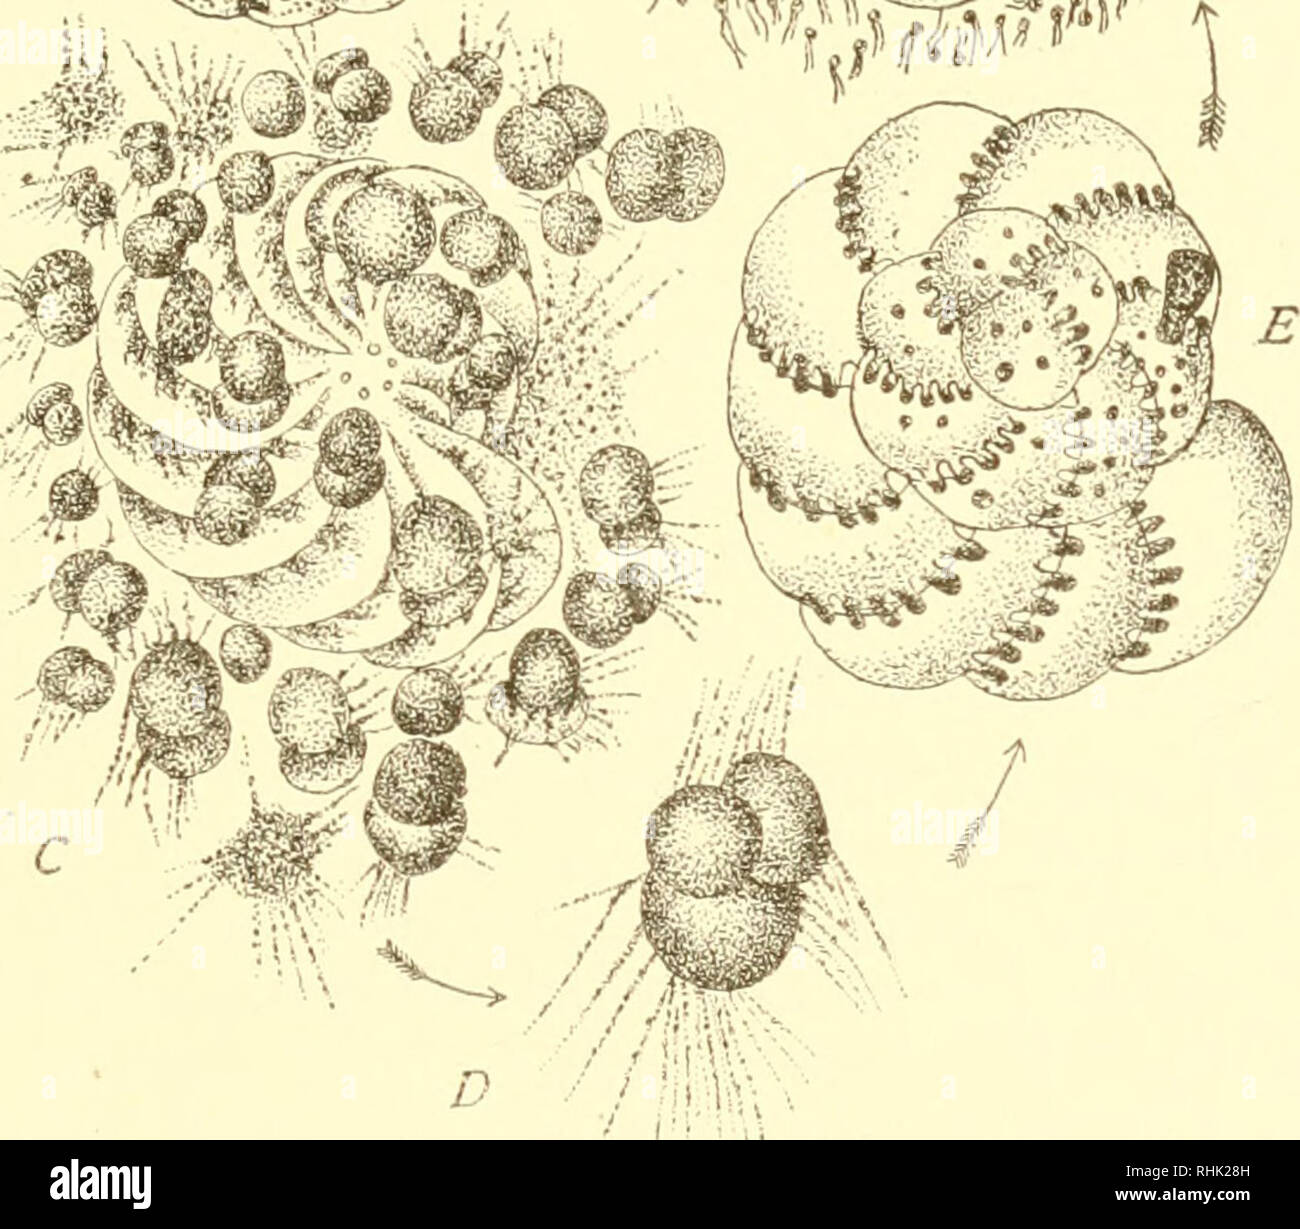 . The biology of the protozoa. Protozoa; Protozoa. w imfm*1. Fig. 123.— Polystomellina crispa. A zygote (A) develops into an organism with a microspherie type of shell (B) in which the nucleus divides by mitosis until many nuclei are present which form chromidia. The protoplasm fragments into reproduc- tive bodies or agametes, each having several granules of chromidia (C). Each agamete develops into an adult with a macrospheric type of shell (D, E): when adult these fragment into hundreds of flagellated gametes (F) which fuse in fertilization and so complete the cycle. (From Lang and Schaudinn Stock Photo